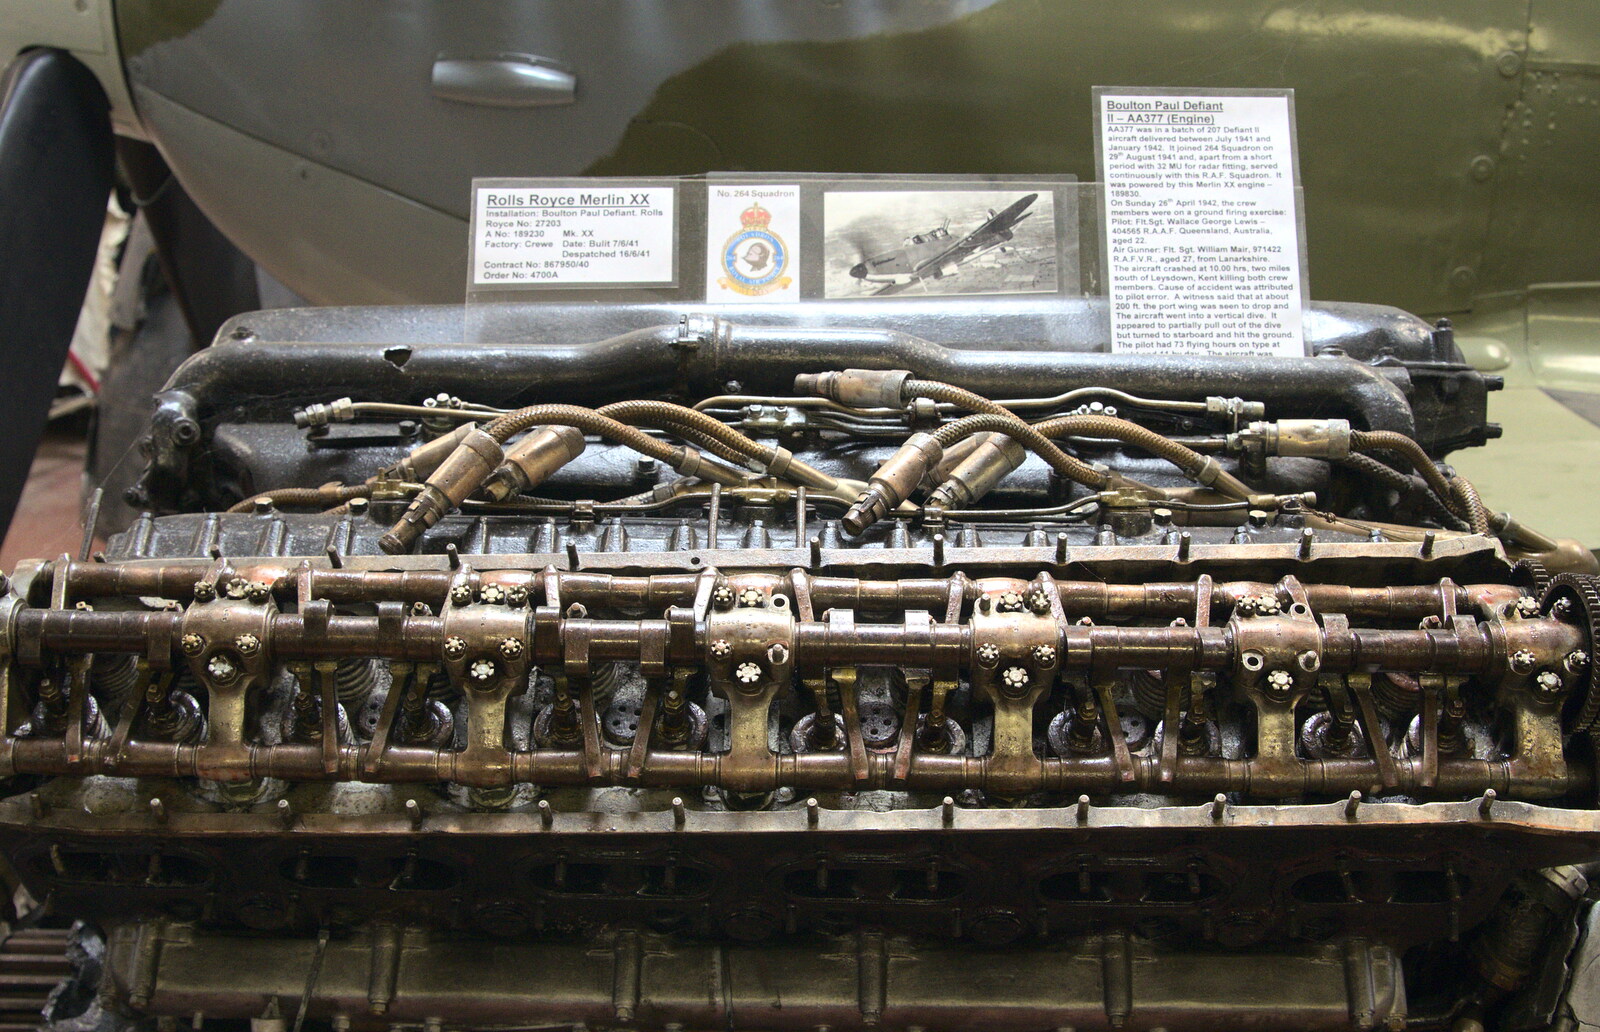 Valves and rockers of a Merlin XX from Norfolk and Suffolk Aviation Museum, Flixton, Suffolk - 30th April 2017